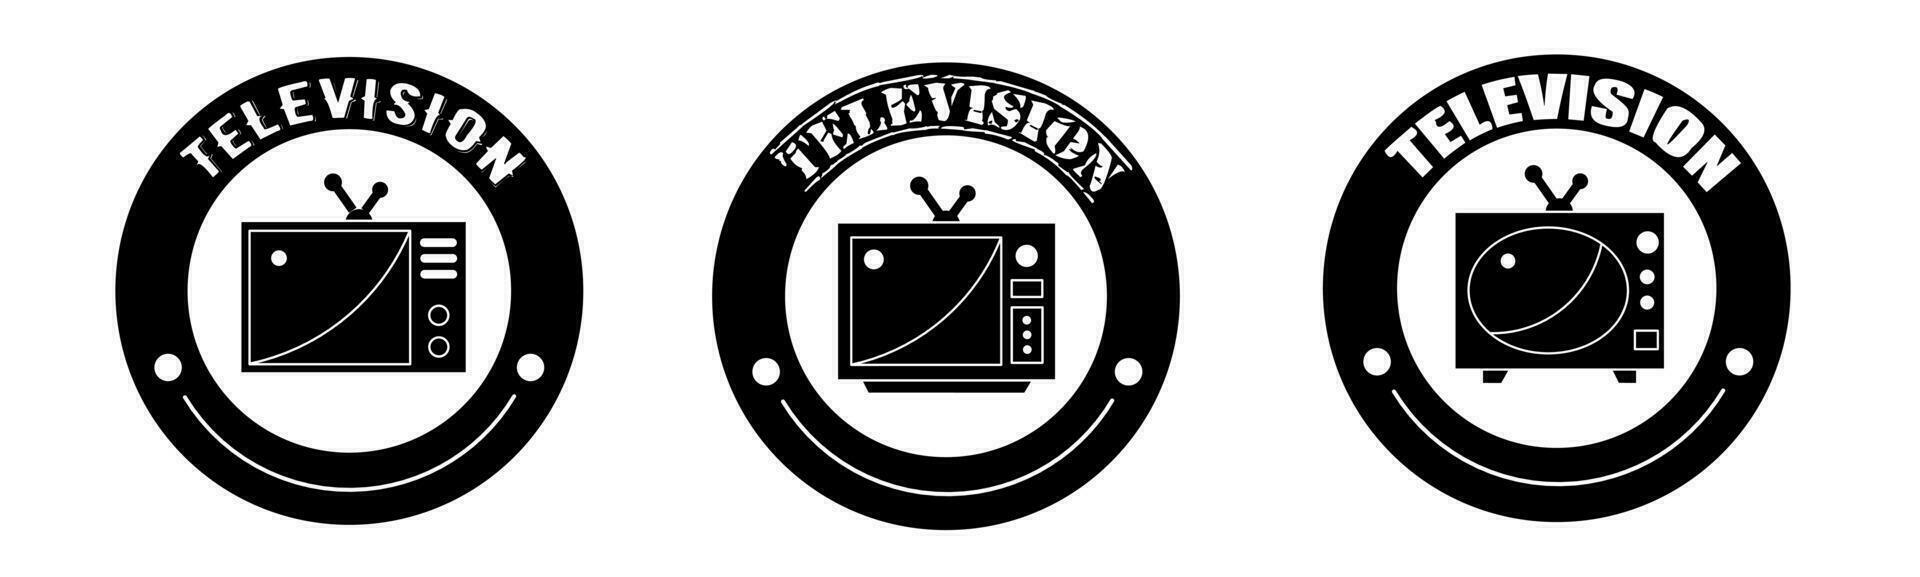 Television product sale icon vector illustration. Design for shop and sale banner business.